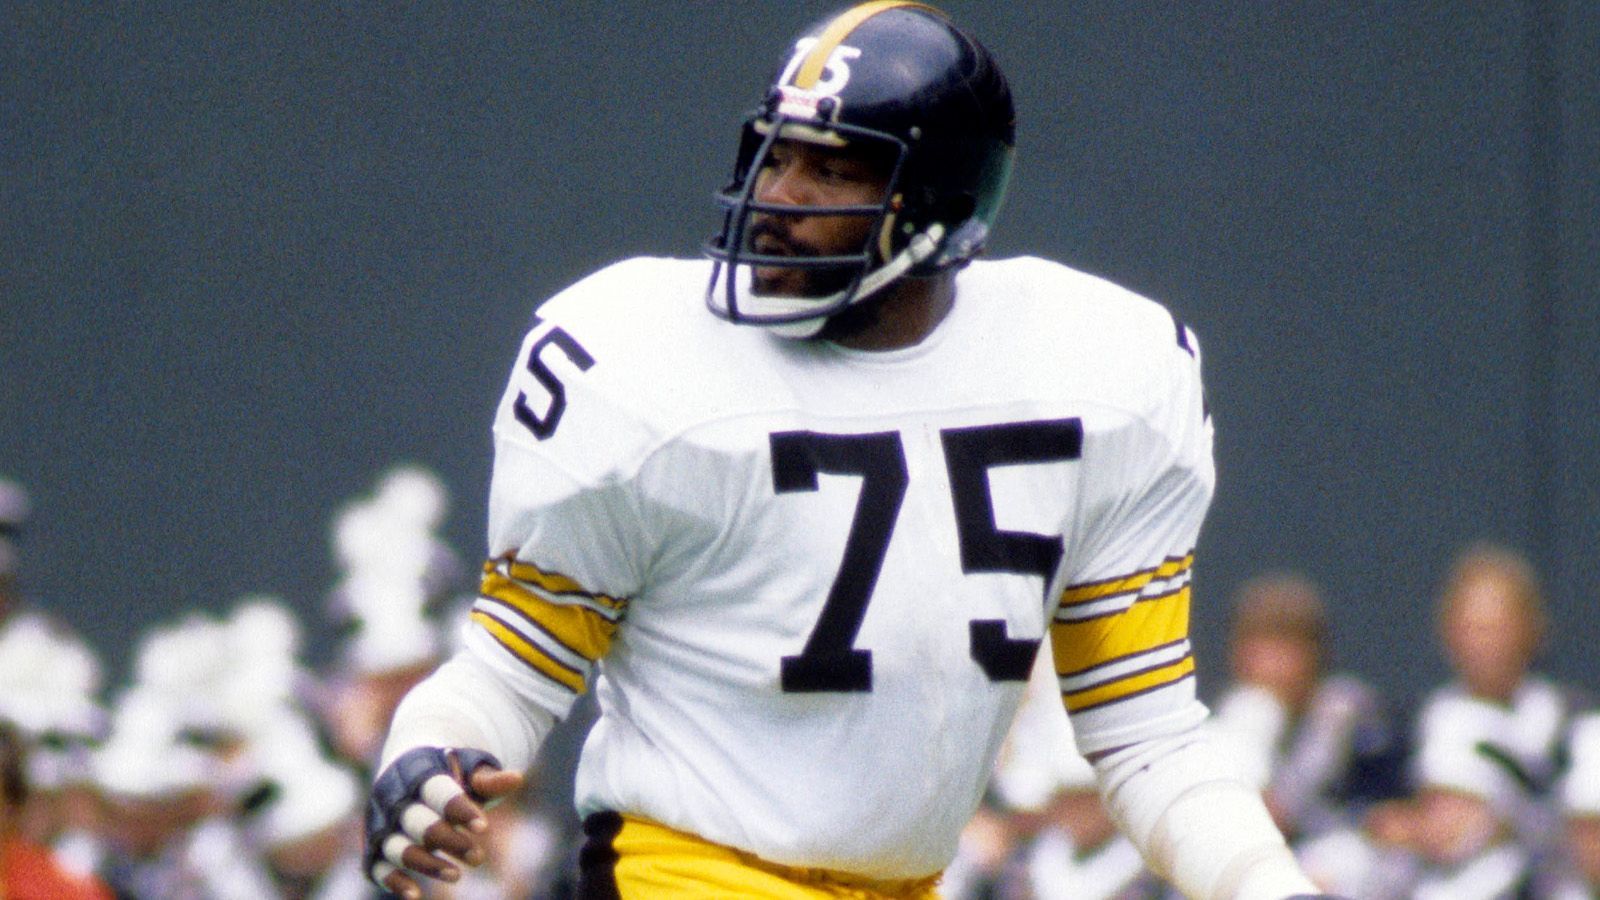 <strong>75: "Mean" Joe Greene</strong><br>Team: Pittsburgh Steelers<br>Position: Defensive Tackle<br>Erfolge: Pro Football Hall of Famer, viermaliger Super-Bowl-Champion, zweimaliger NFL Defensive Player of the Year, fünfmaliger First Team All-Pro, zehnmaliger Pro Bowler<br>Honorable Mentions: Deacon Jones, Howie Long